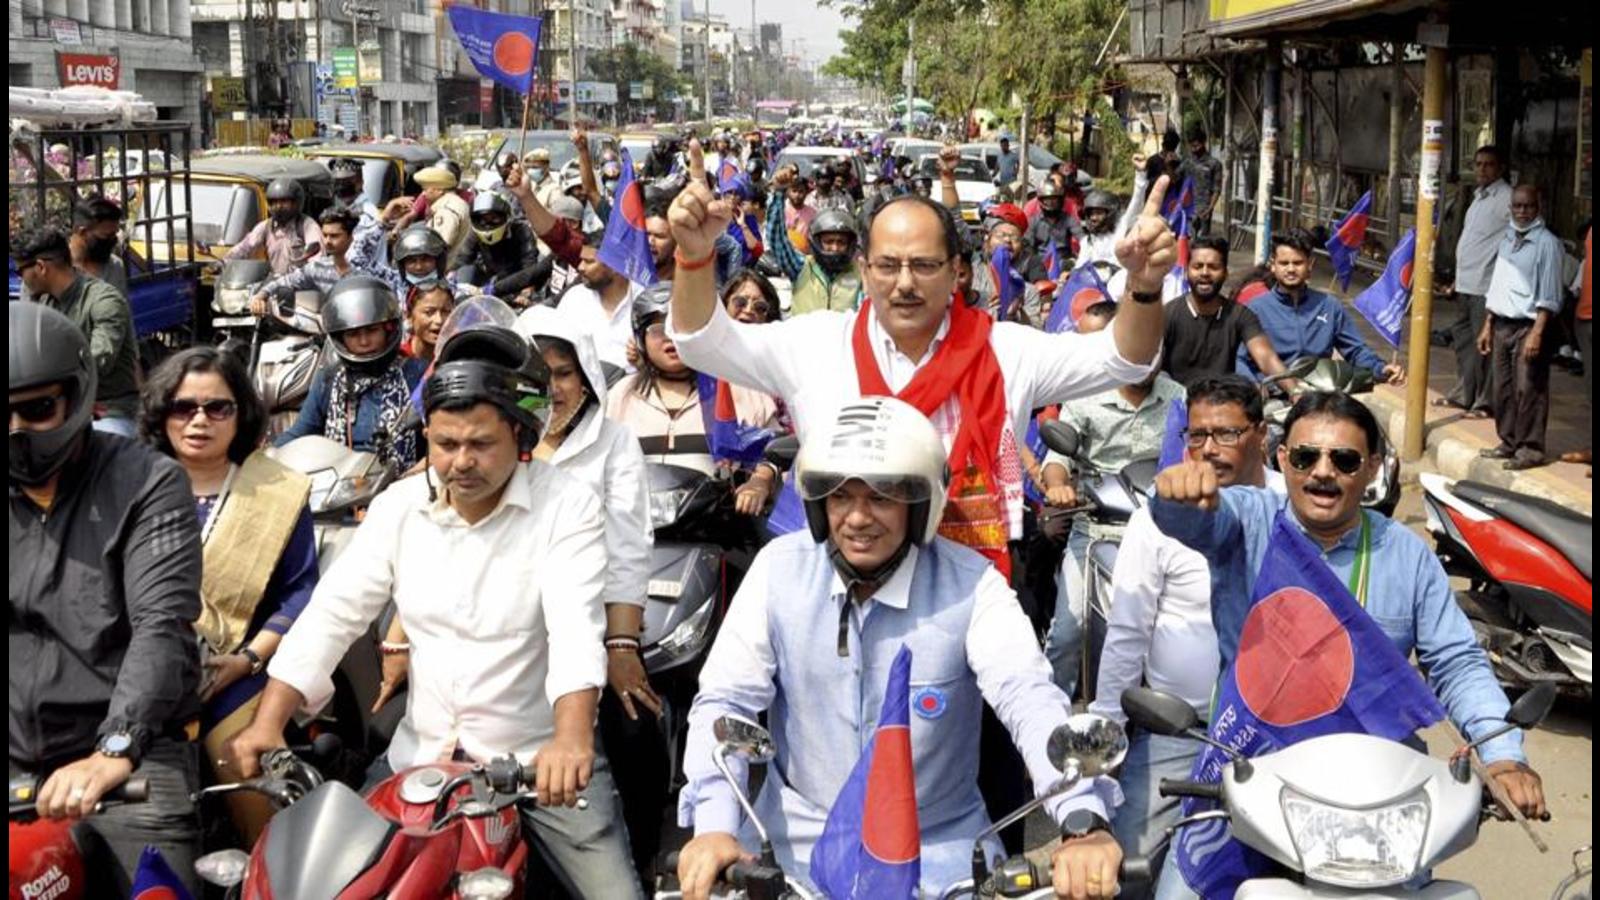 Election Commission bans bike rallies in states 72 hours before voting